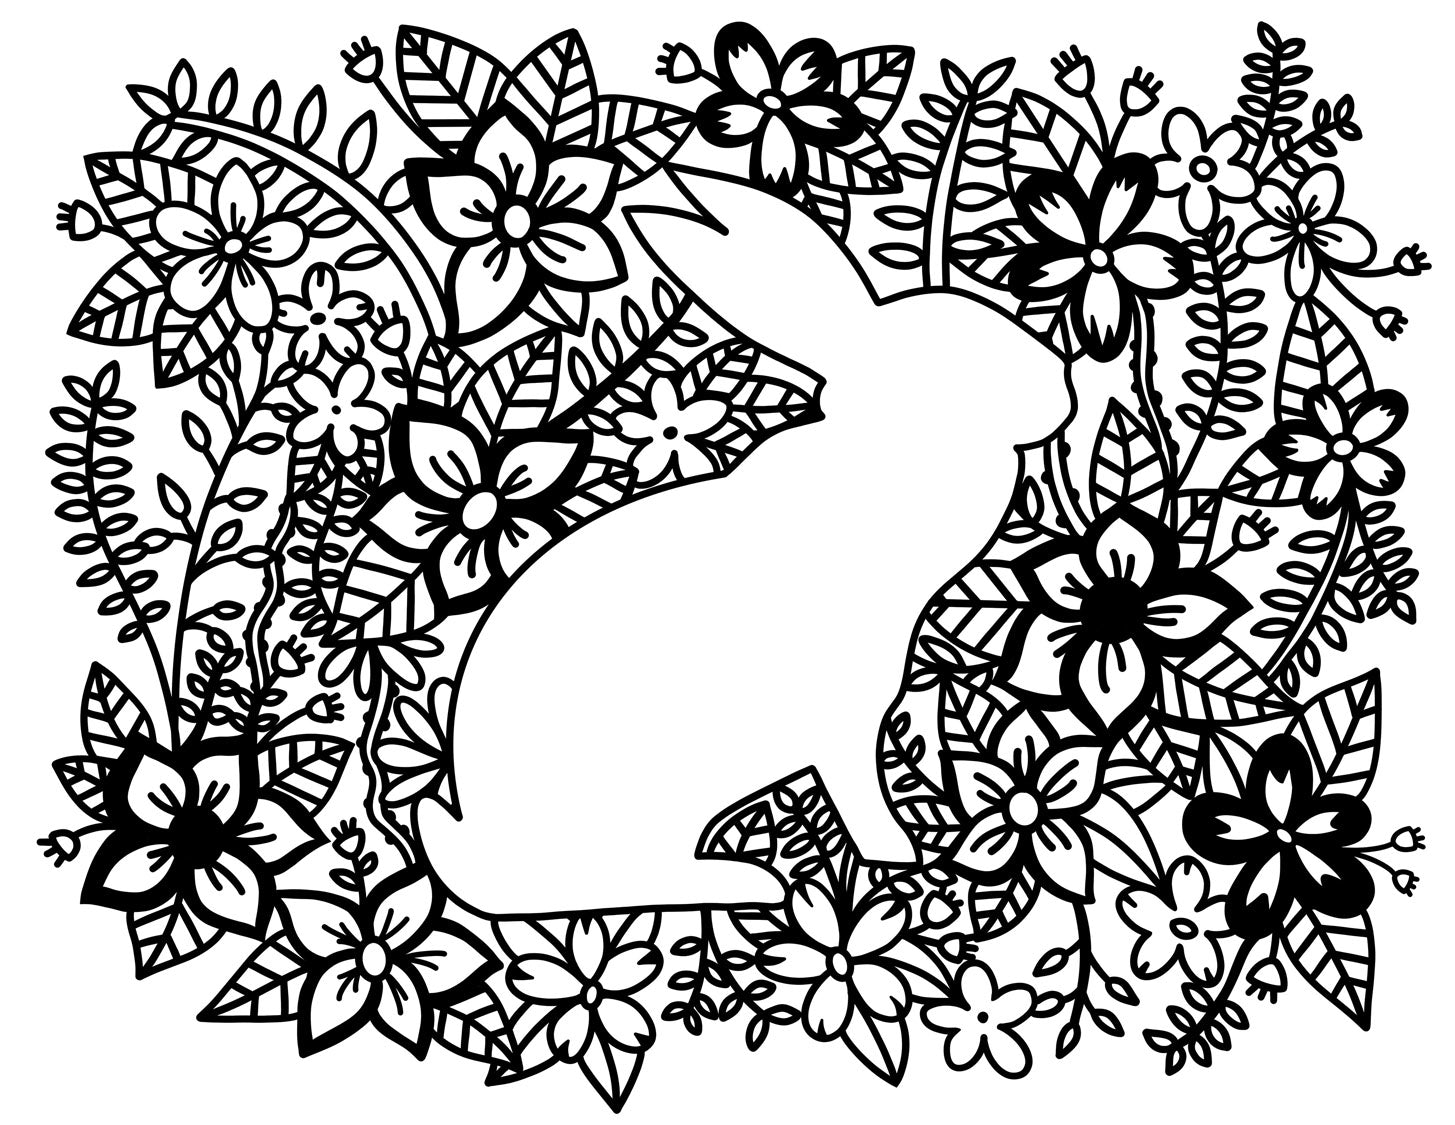 Coloring pages rabbit free download â ta muchly